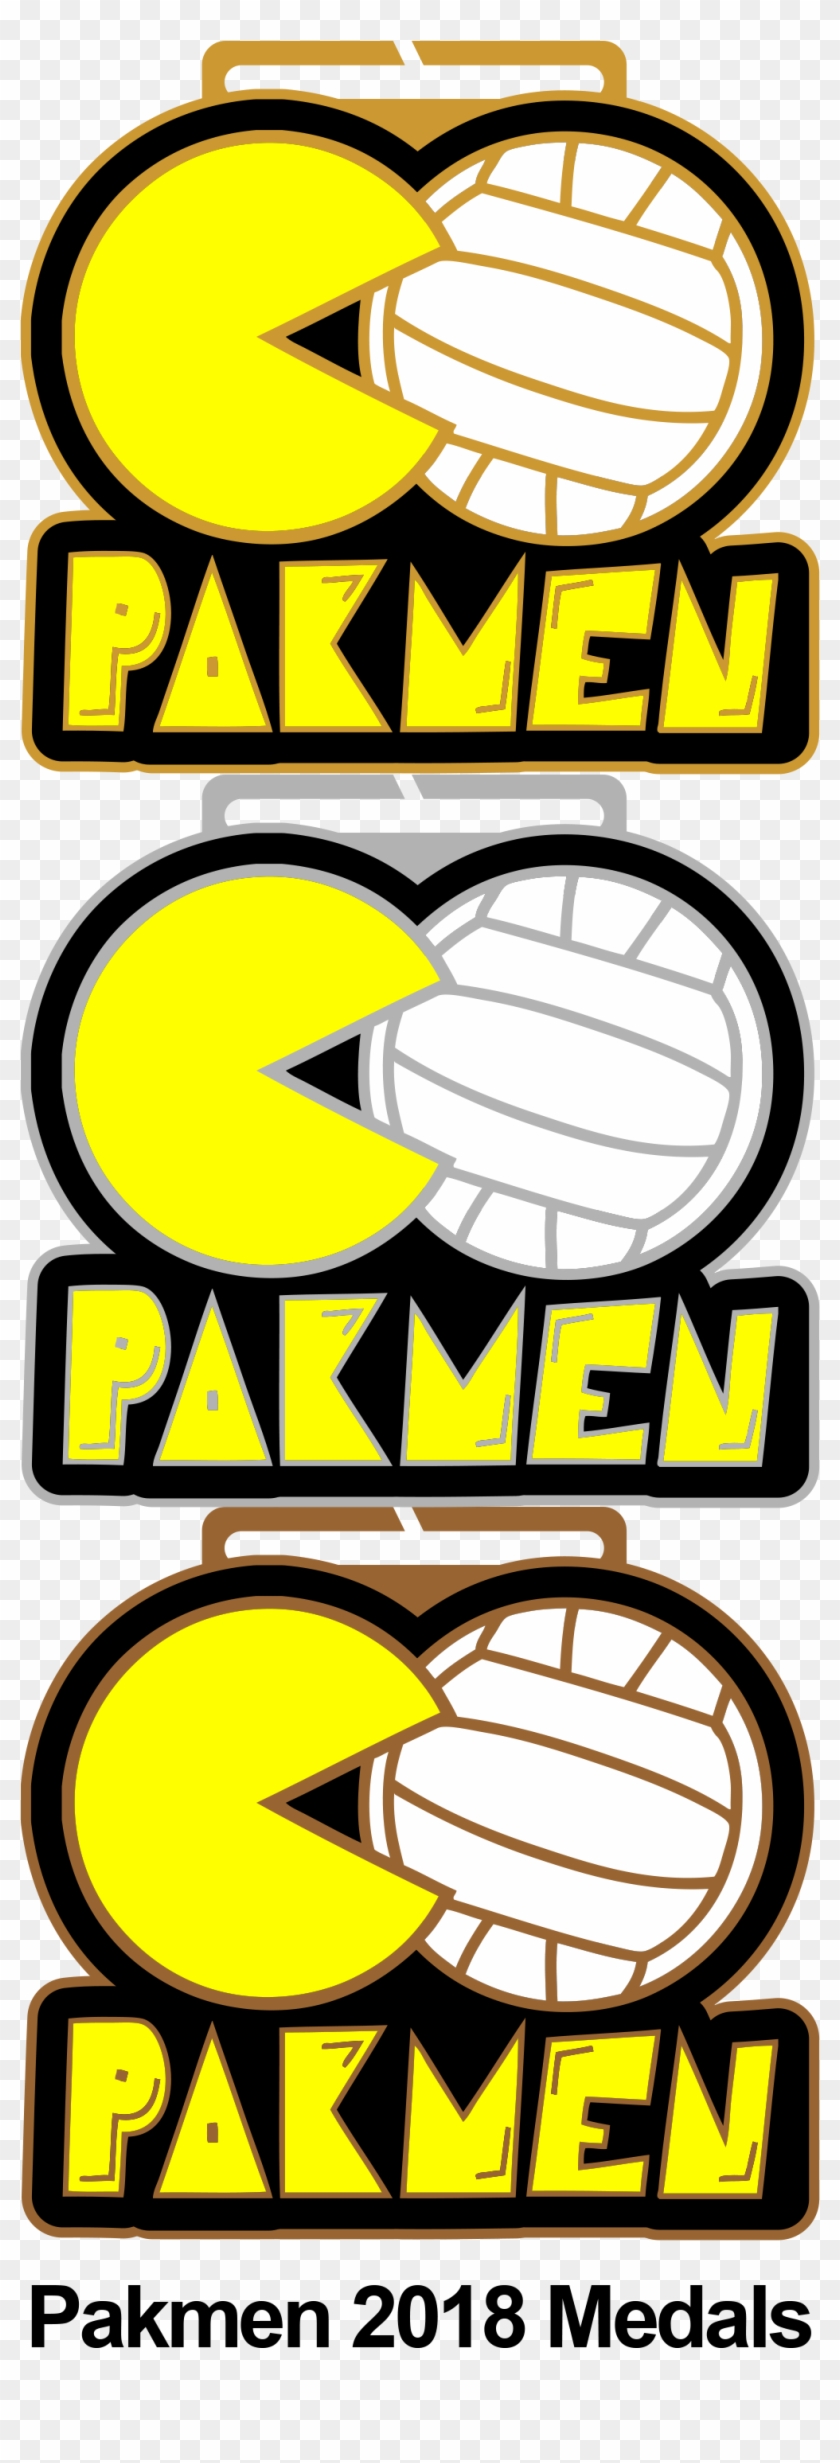 Spikes Learn To Play Volleyball Program Logo Pakmen - Spikes Learn To Play Volleyball Program Logo Pakmen #1740042